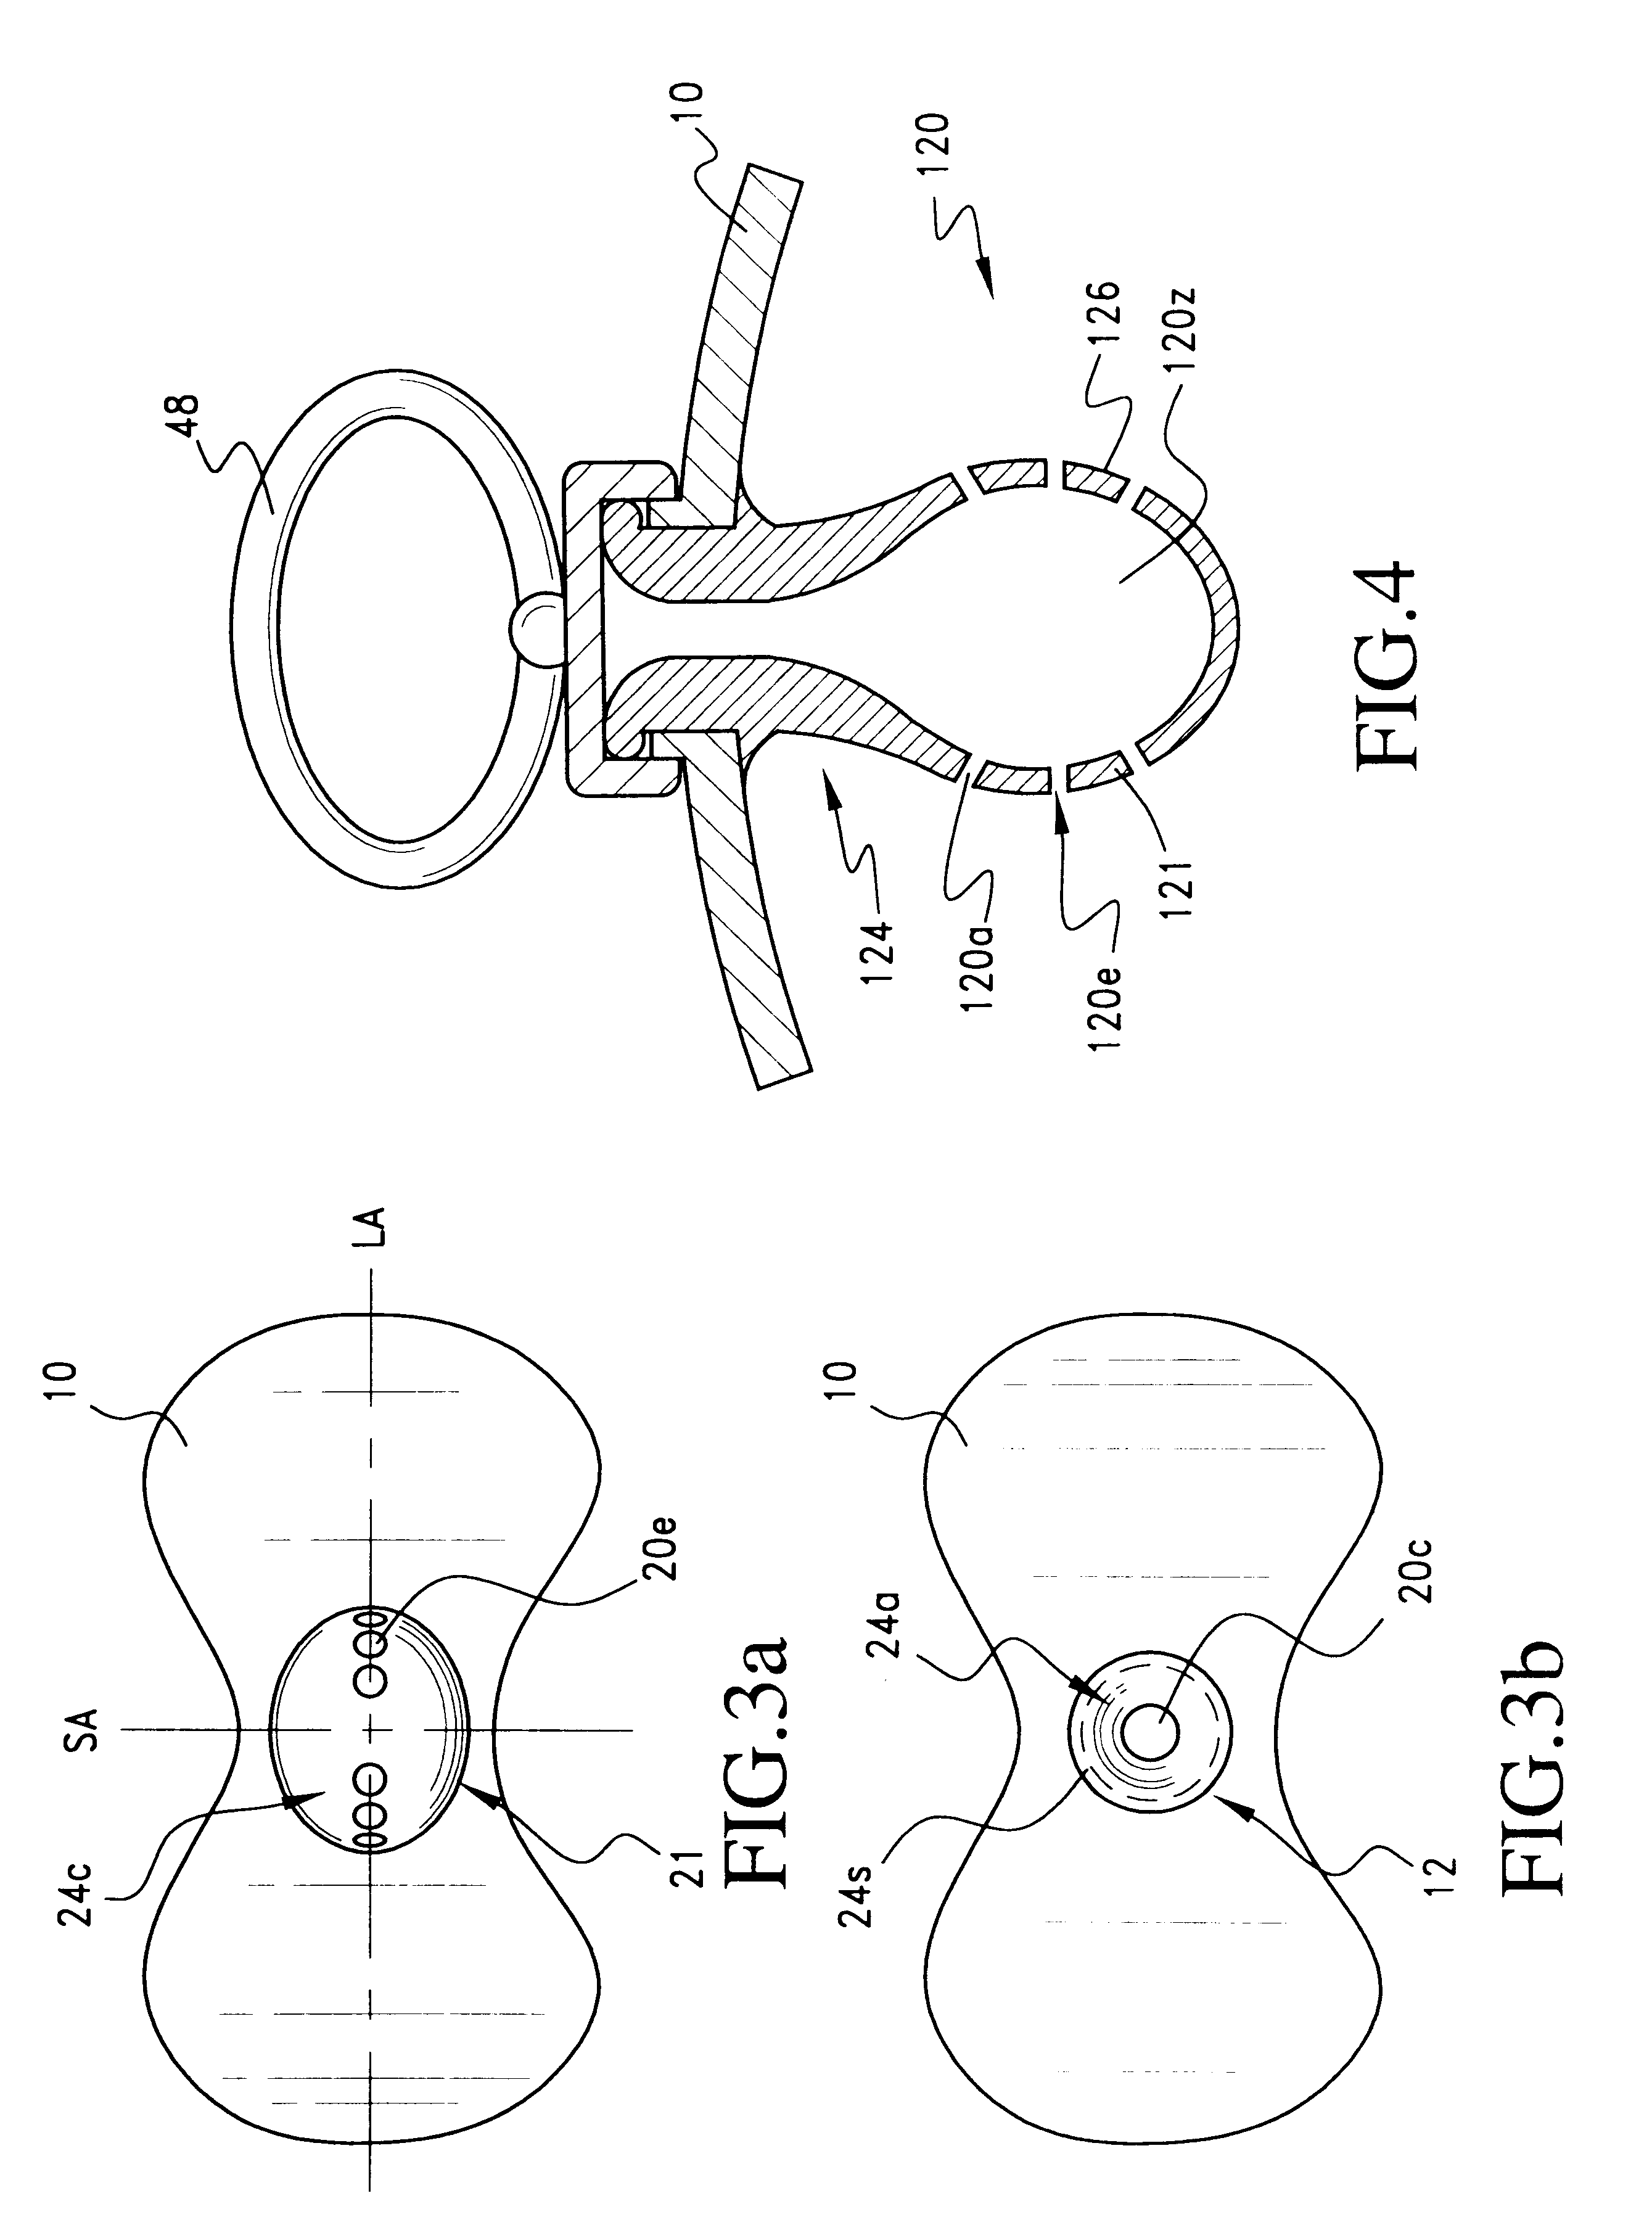 Method and apparatus for oral hydration and medication administration using a pacifier apparatus